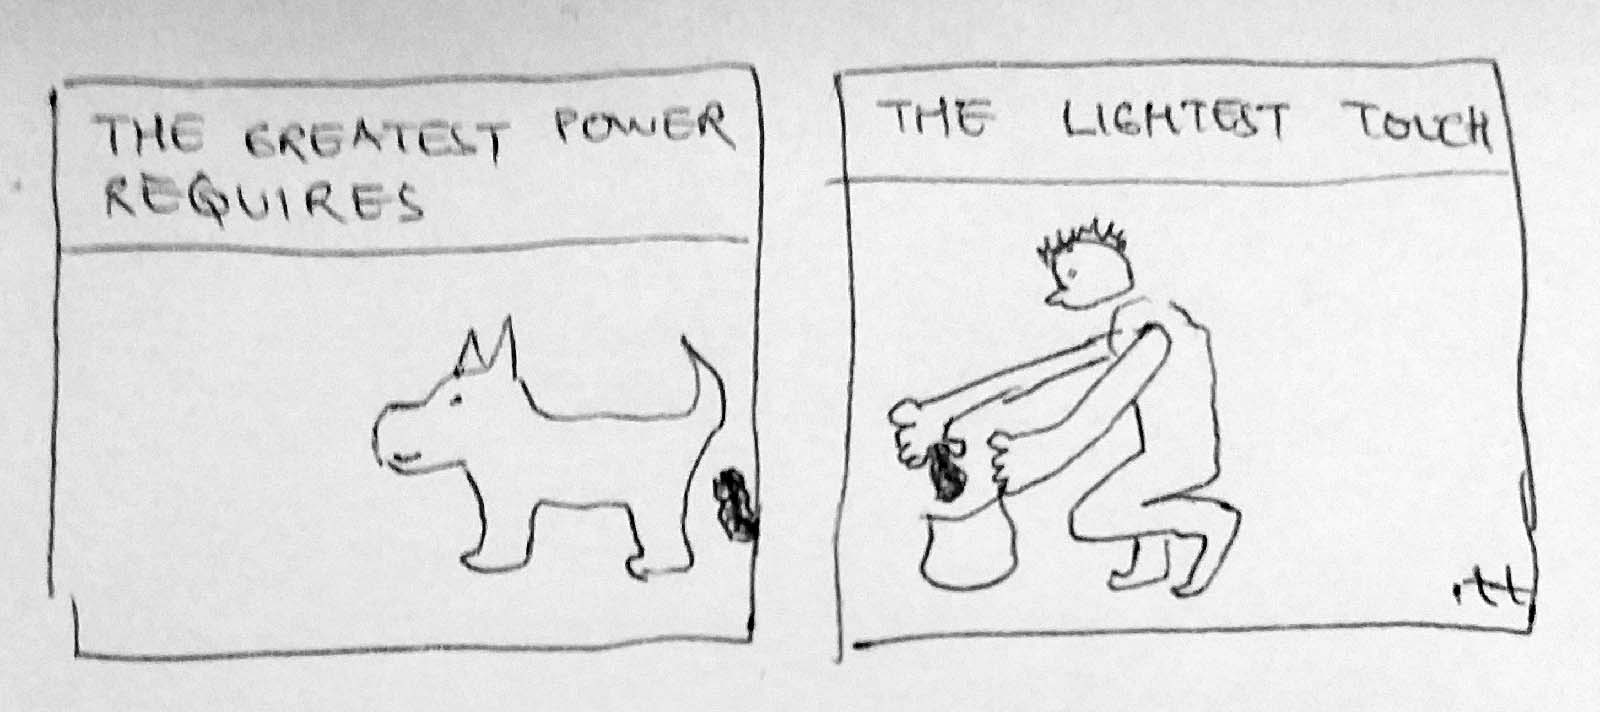 The greatest power